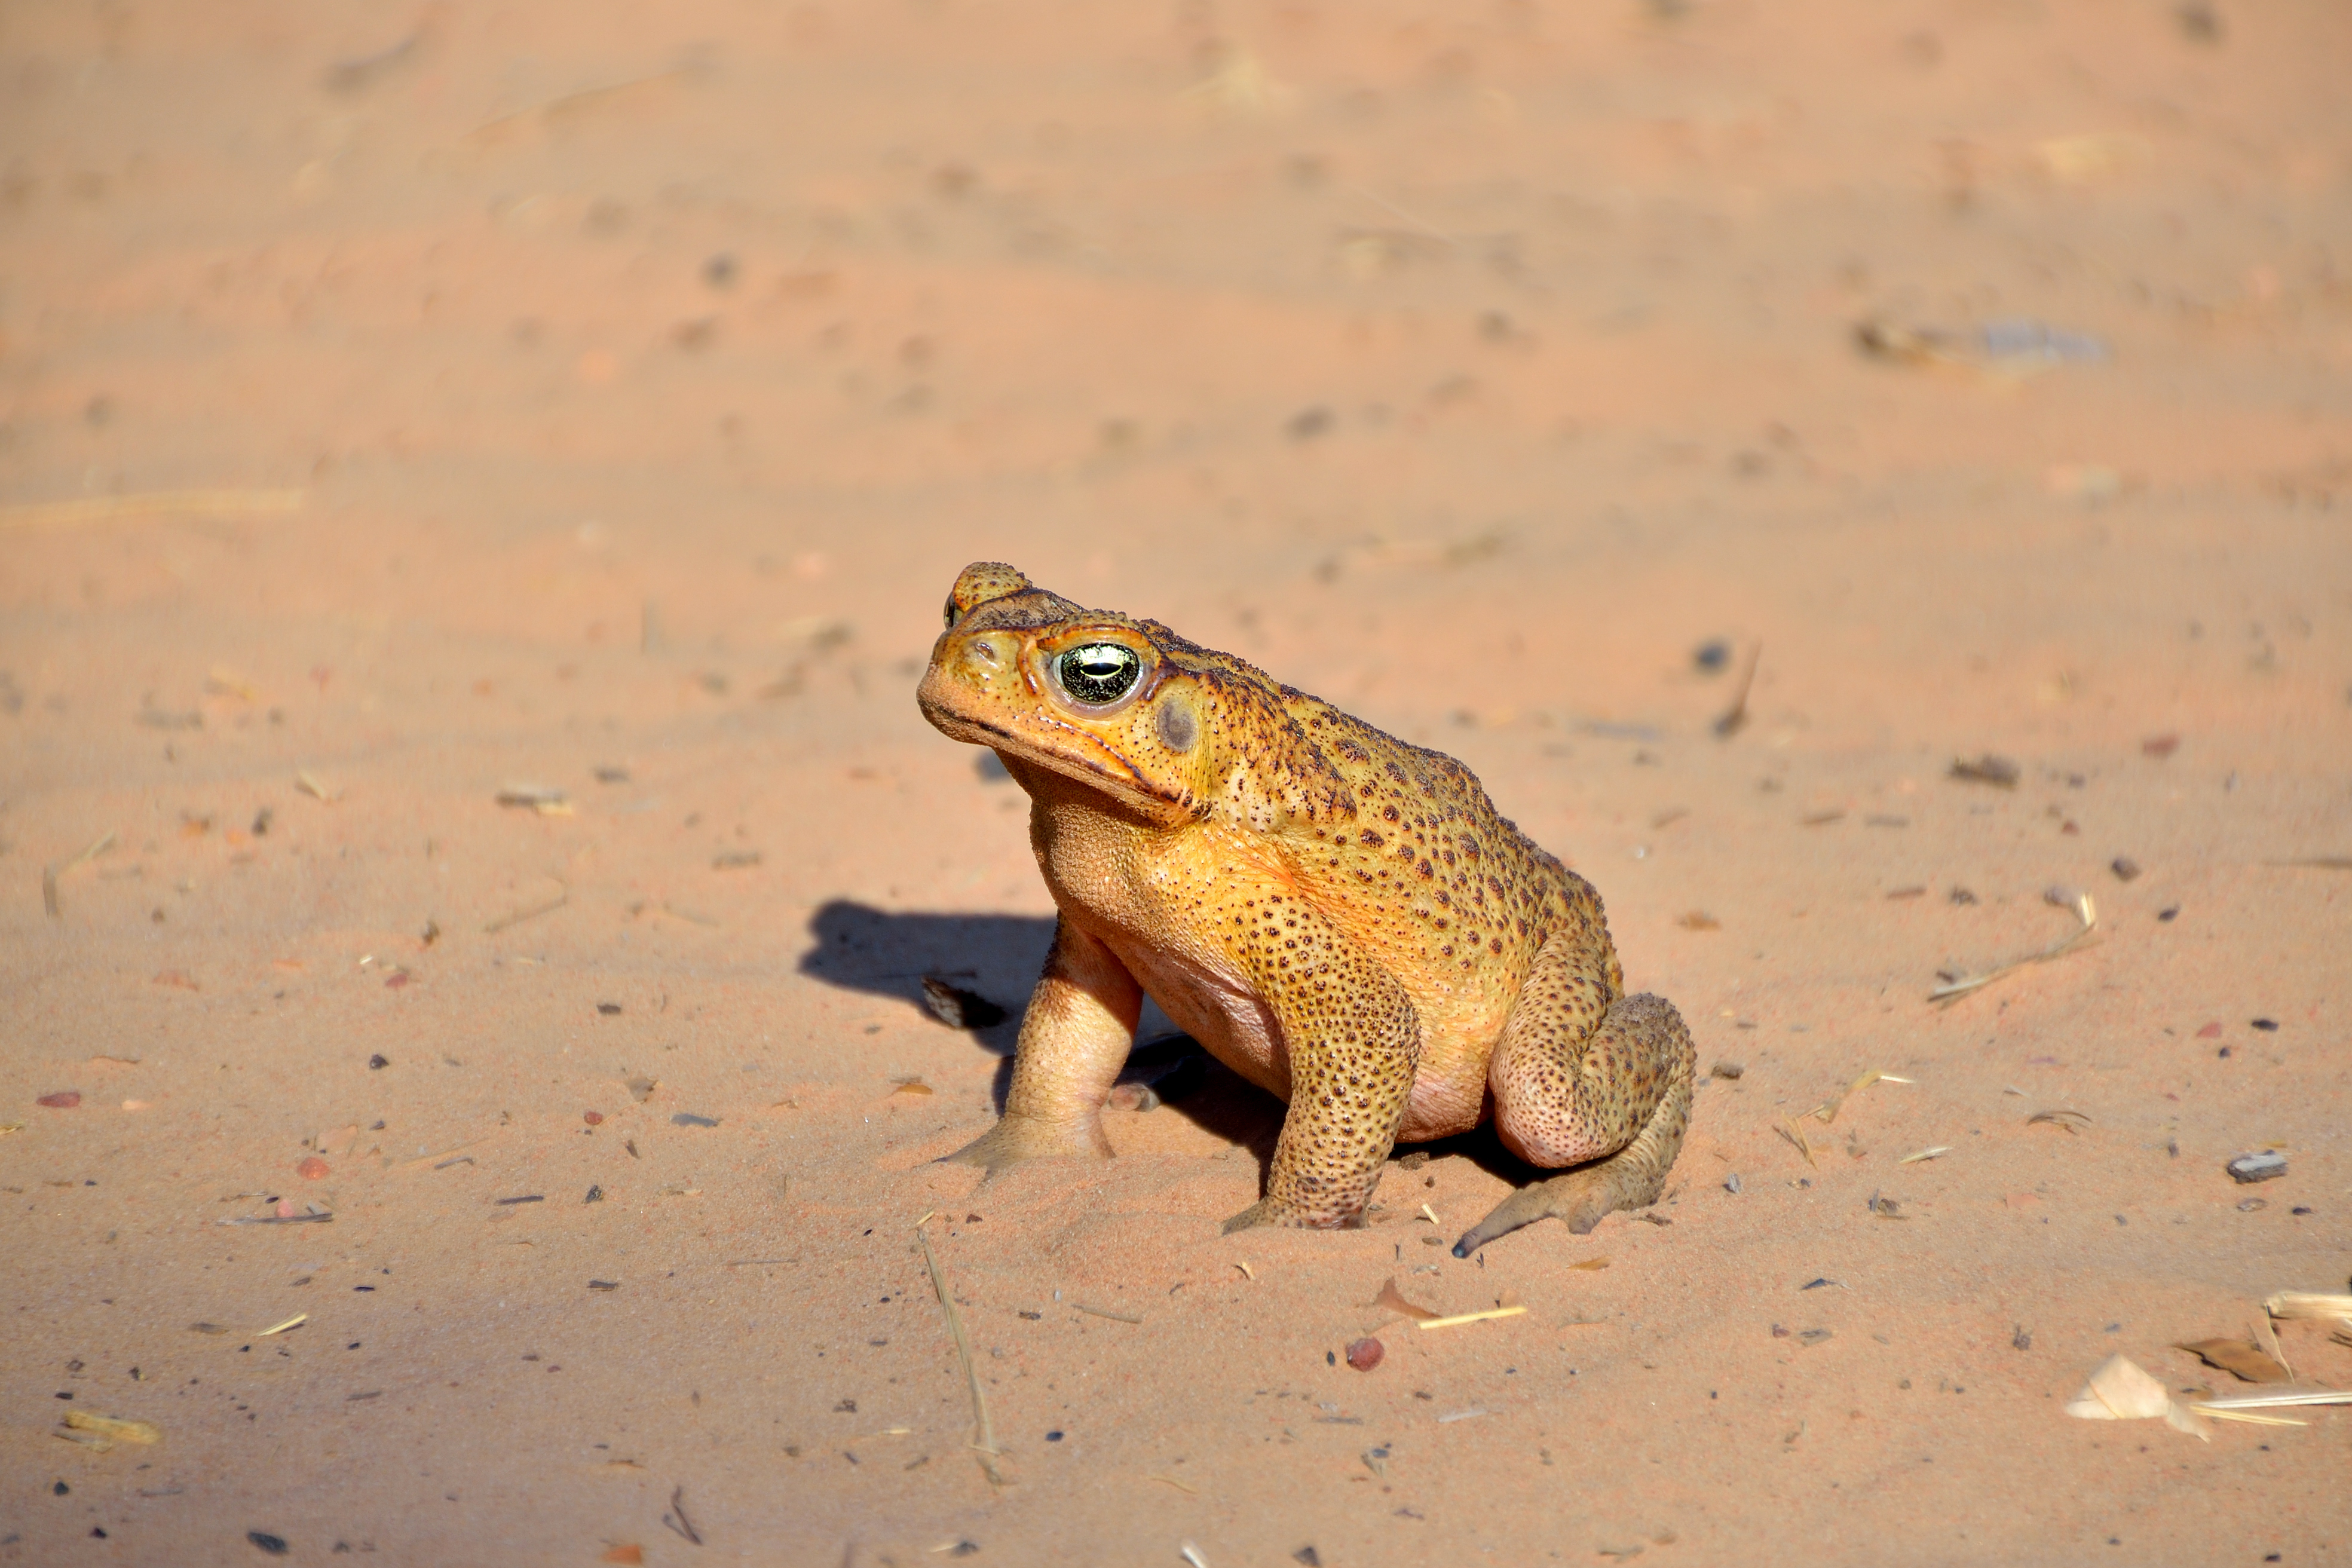 A cane toad warms up in the sun at Ellenbrae station on the Gibb River Road